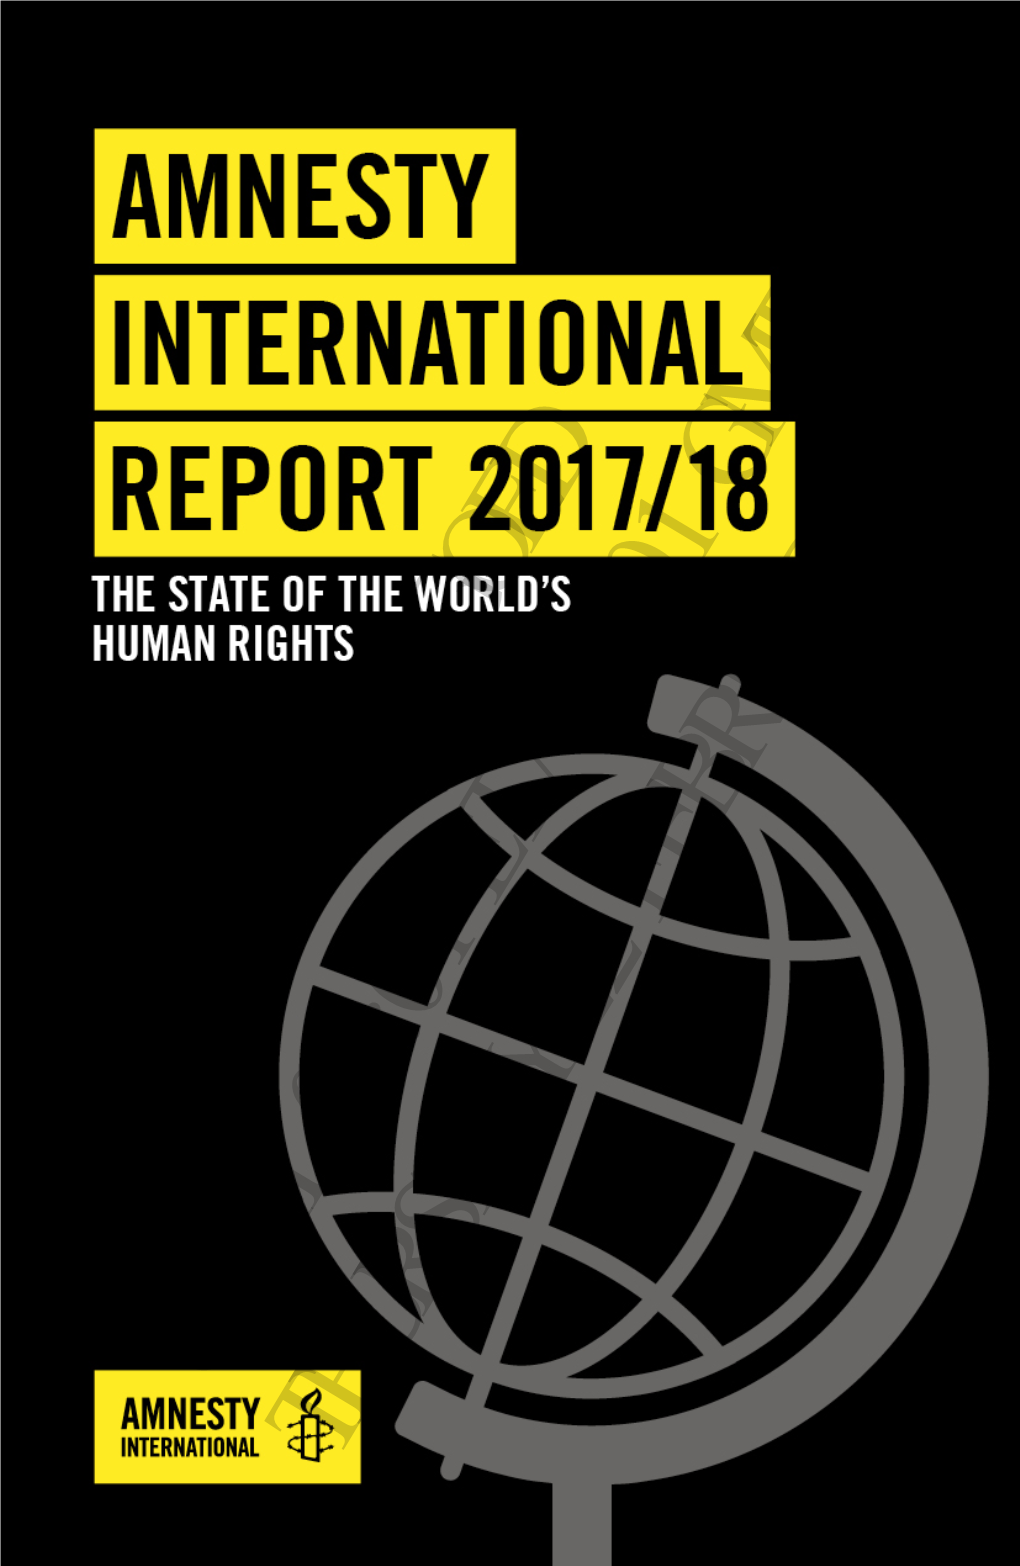 Amnesty International Report 2017/18 AMNESTY INTERNATIONAL REPORT 2017/18 GMT 2018 the STATE of the WORLD’S HUMAN RIGHTS 05:01